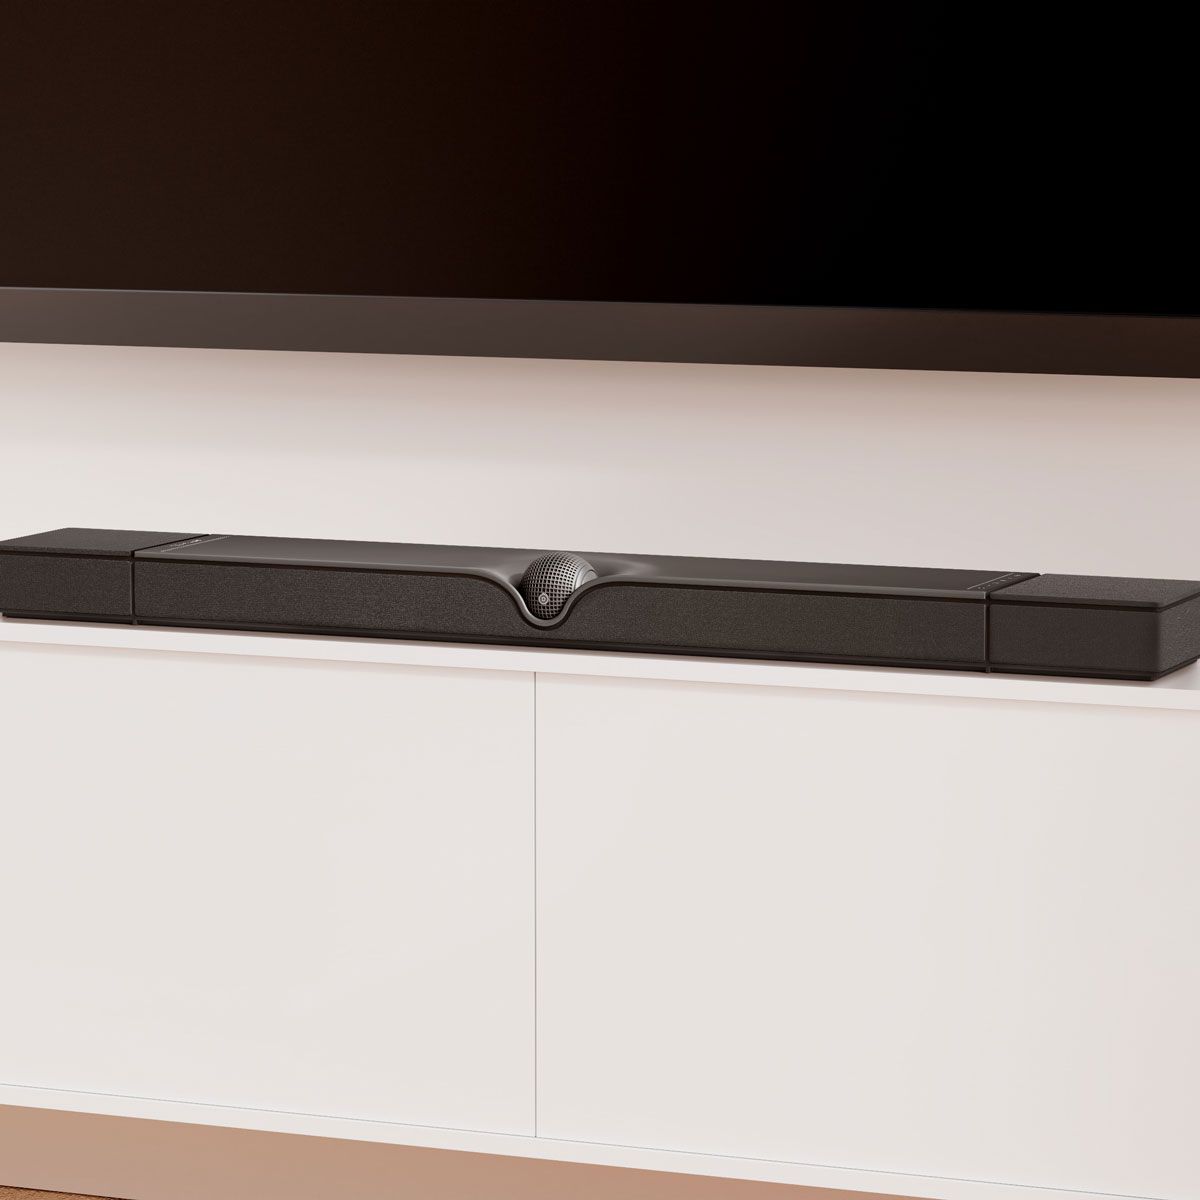 Devialet Dione Dolby Atmos Soundbar, on a media console in horizontal configuration